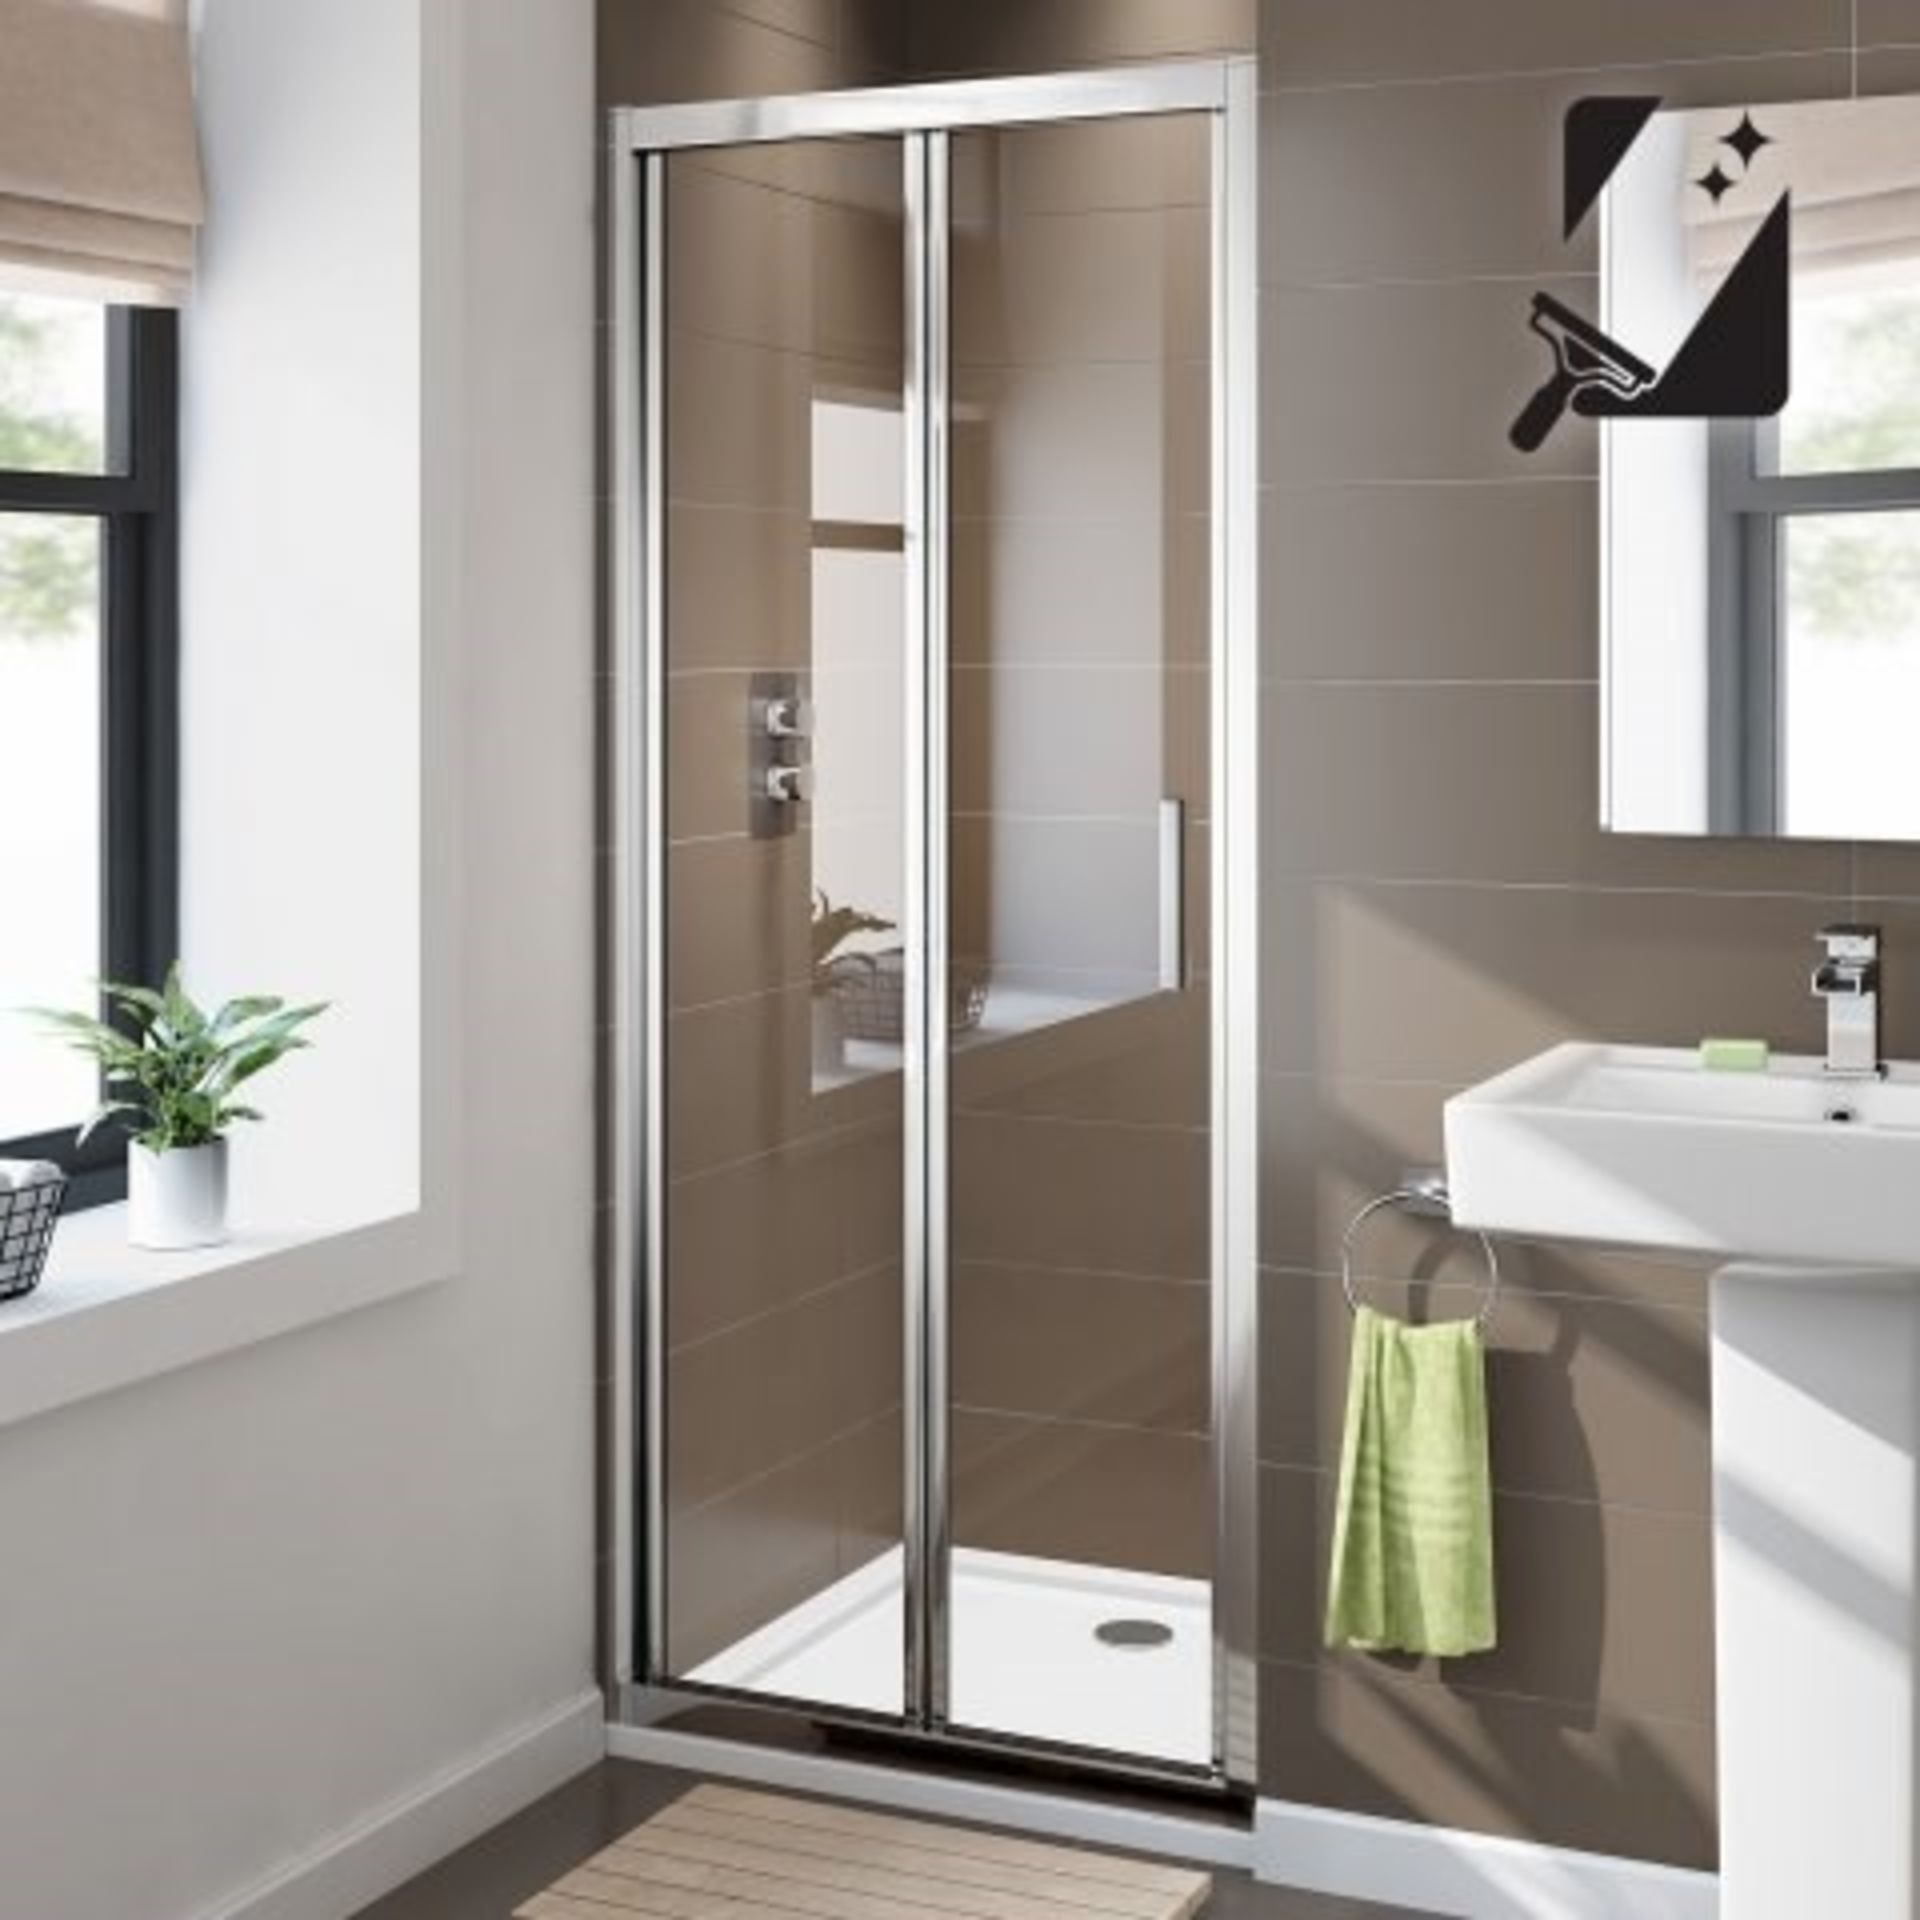 NEW (M19) 760mm - 8mm - Premium EasyClean Bifold Shower Door. RRP £379.99.Durability to withs... - Image 2 of 3